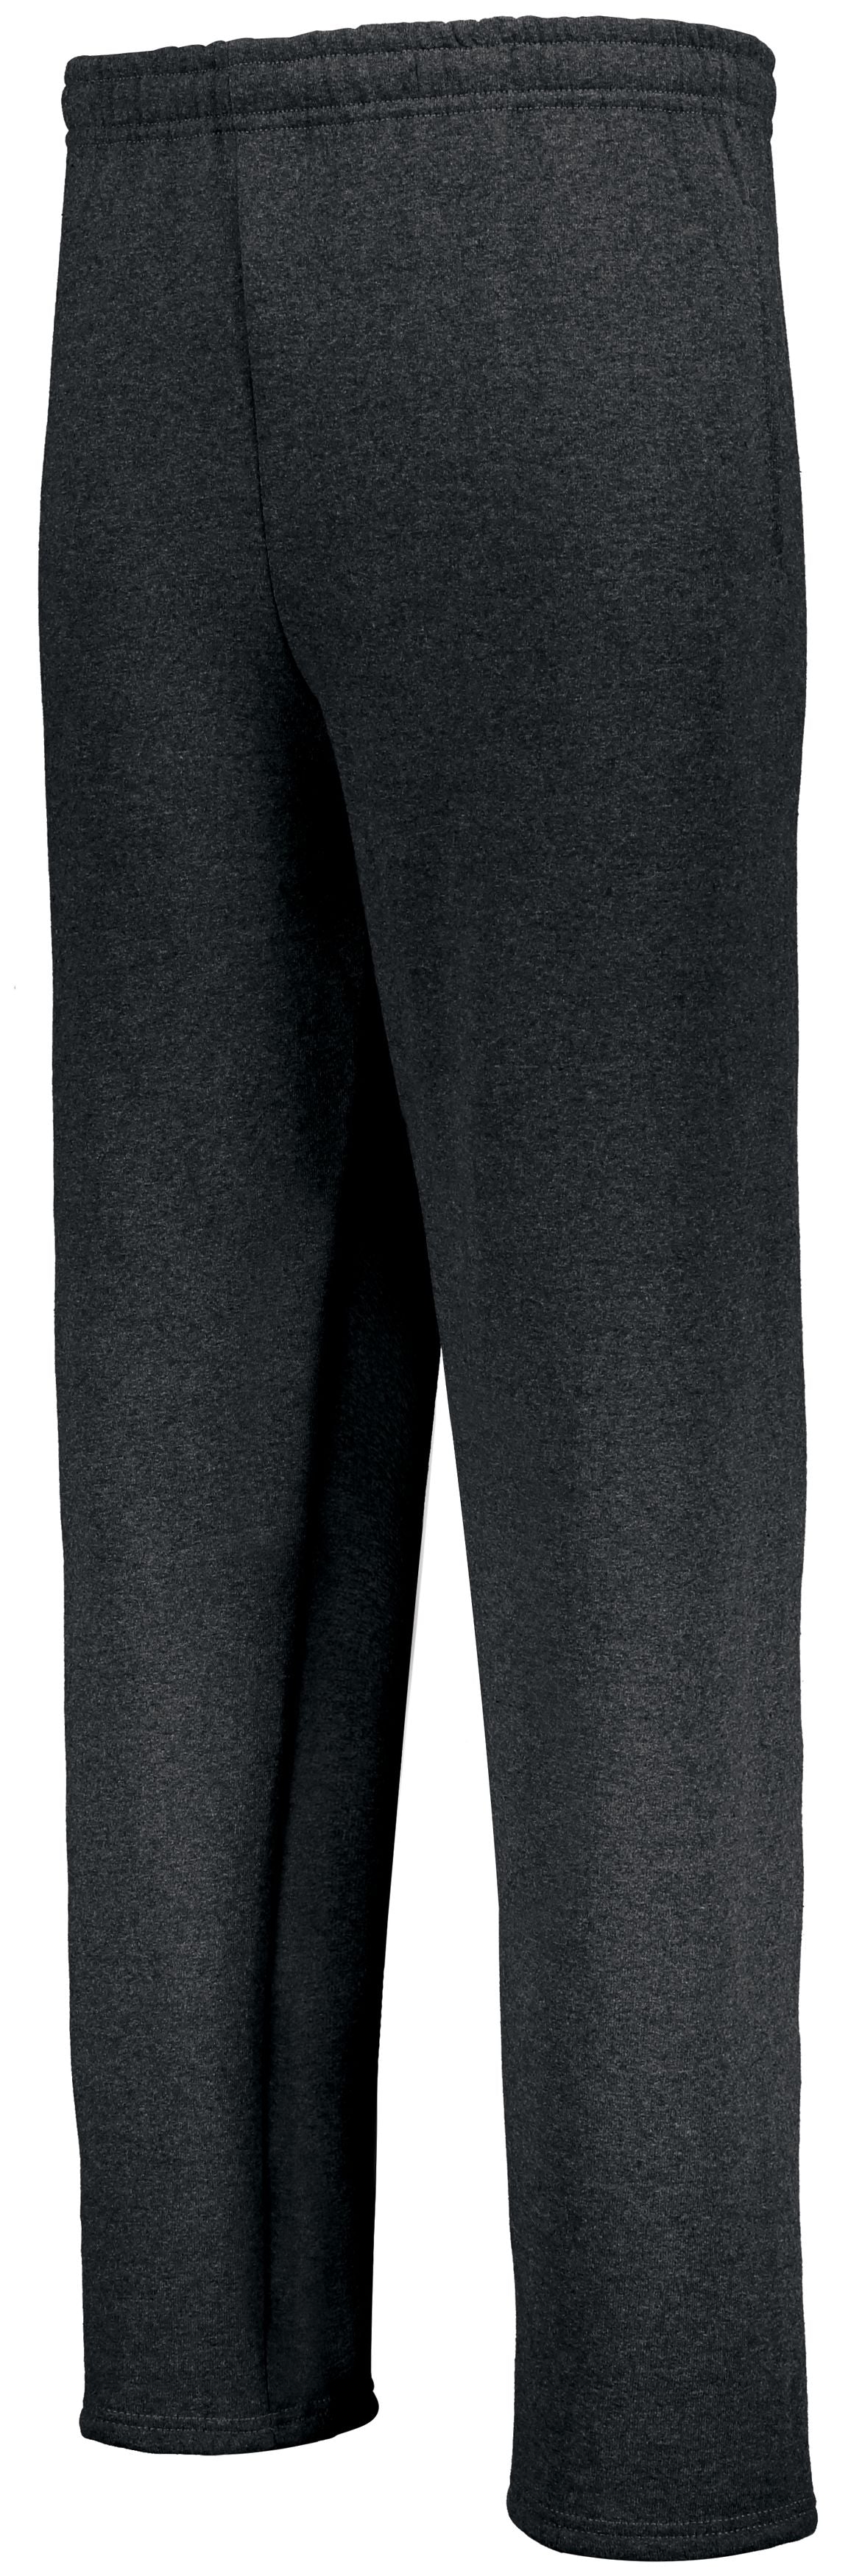 Russell Athletic Dri-Power  Open Bottom Pocket Sweatpant in Black  -Part of the Adult, Adult-Pants, Pants, Russell-Athletic-Products product lines at KanaleyCreations.com